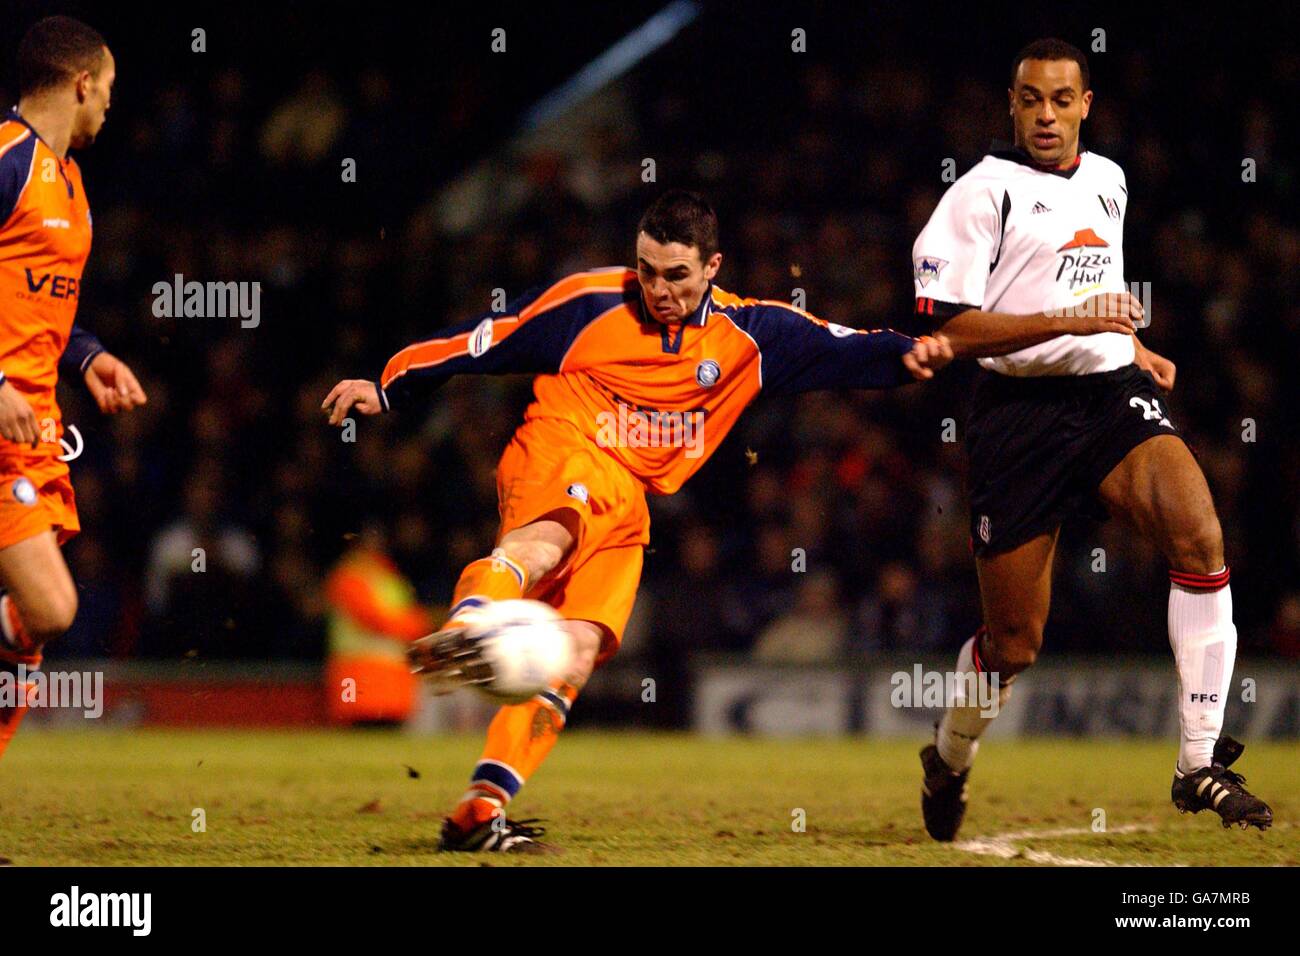 Wycombe Wanderers' Stuart Roberts (c) gets a shot on goal despite the attentions of Fulham's Alain Goma (r) Stock Photo